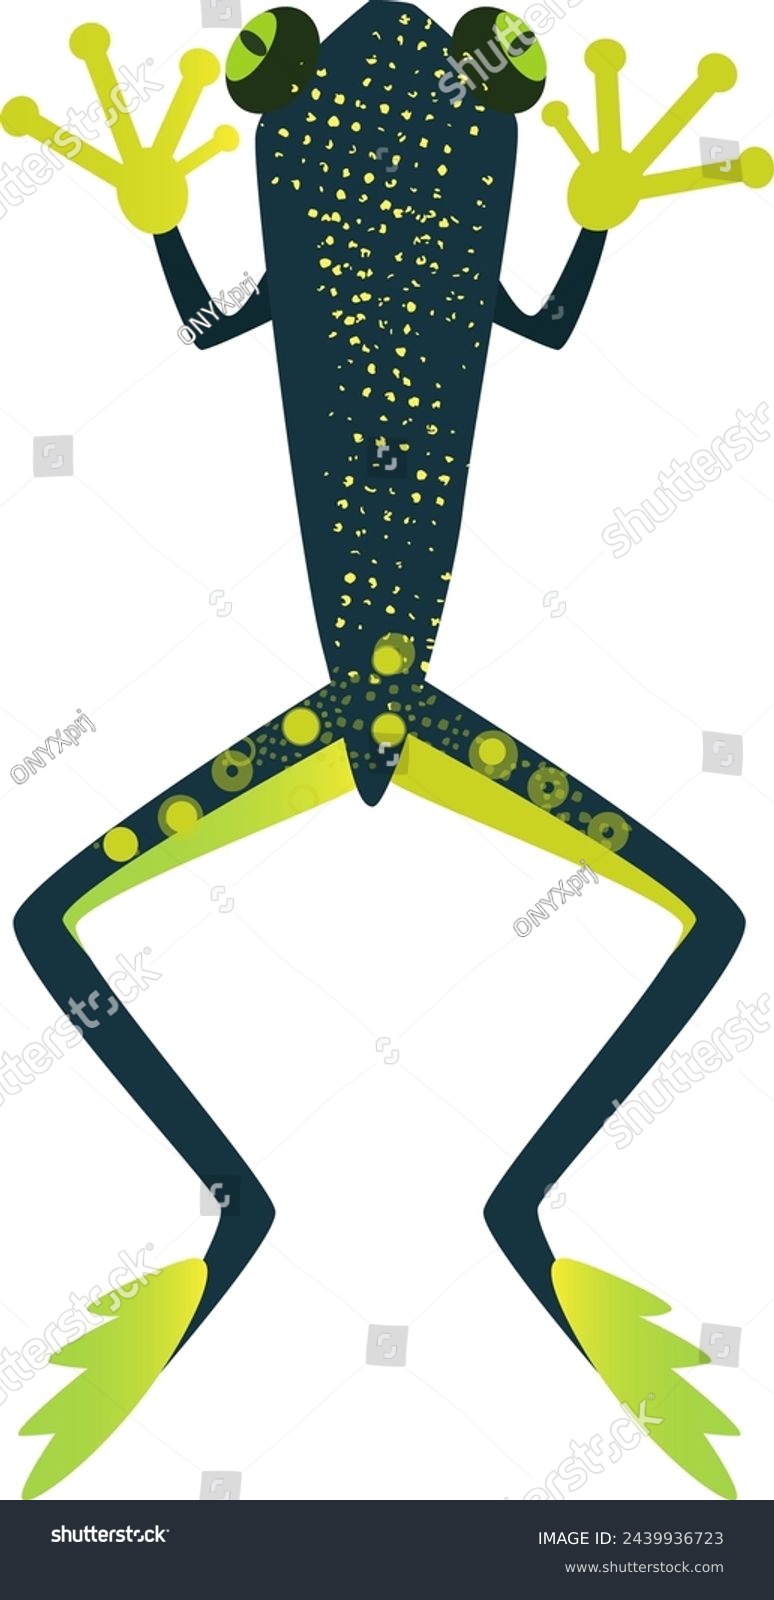 SVG of Exotic amphibia. Jumping frog with patterned green skin svg